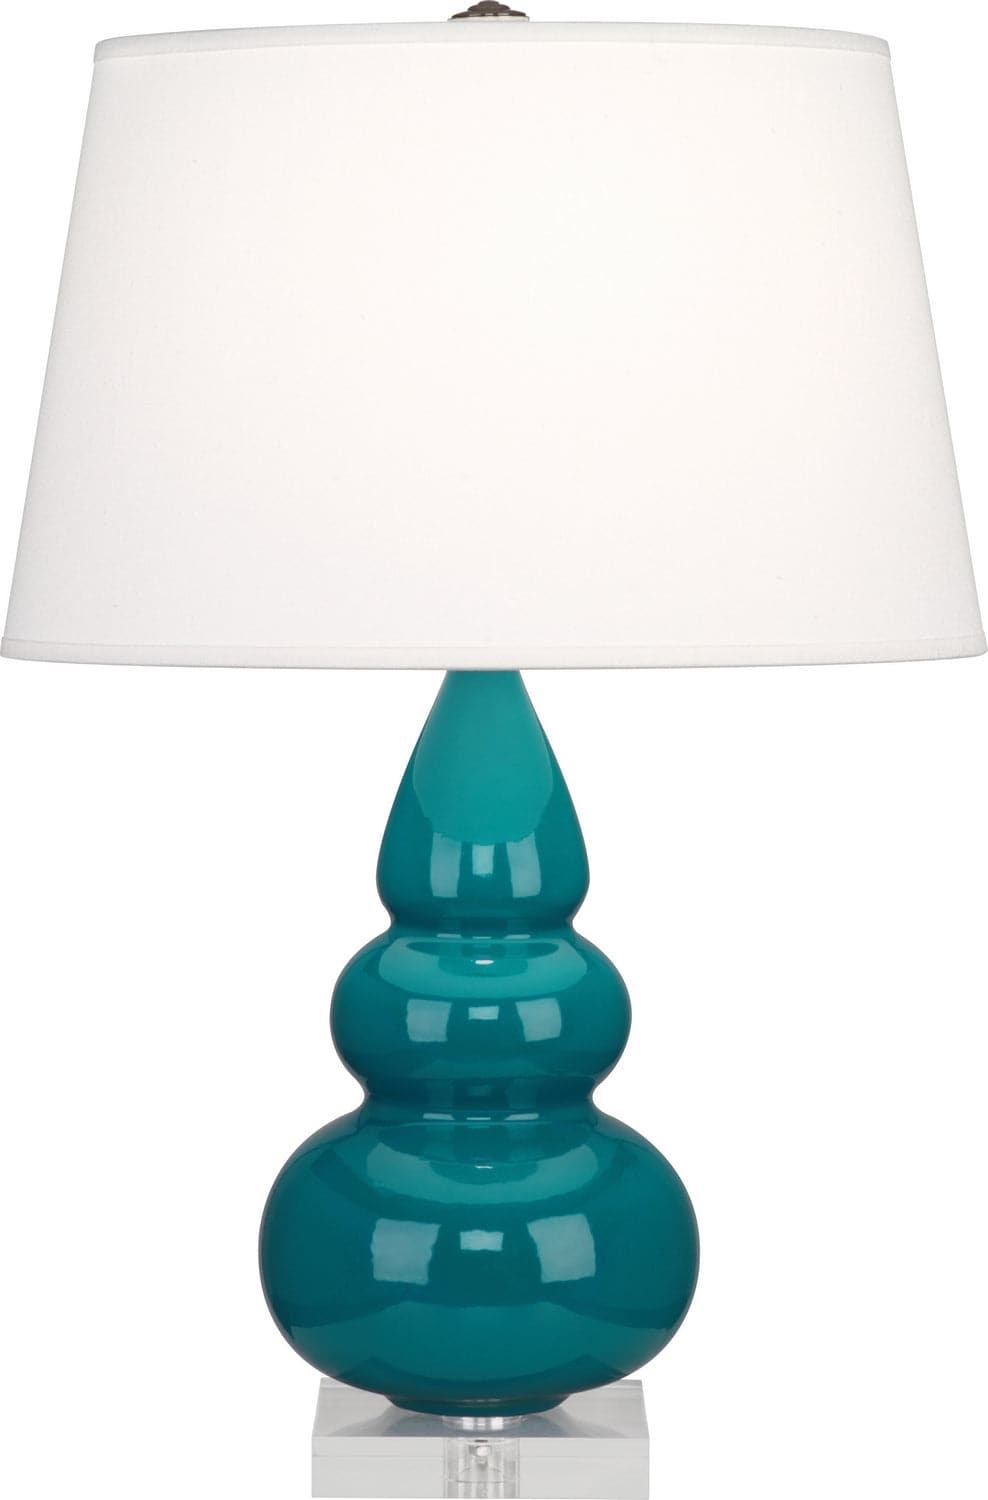 Robert Abbey - A293X - One Light Accent Lamp - Small Triple Gourd - Peacock Glazed w/Lucite Base